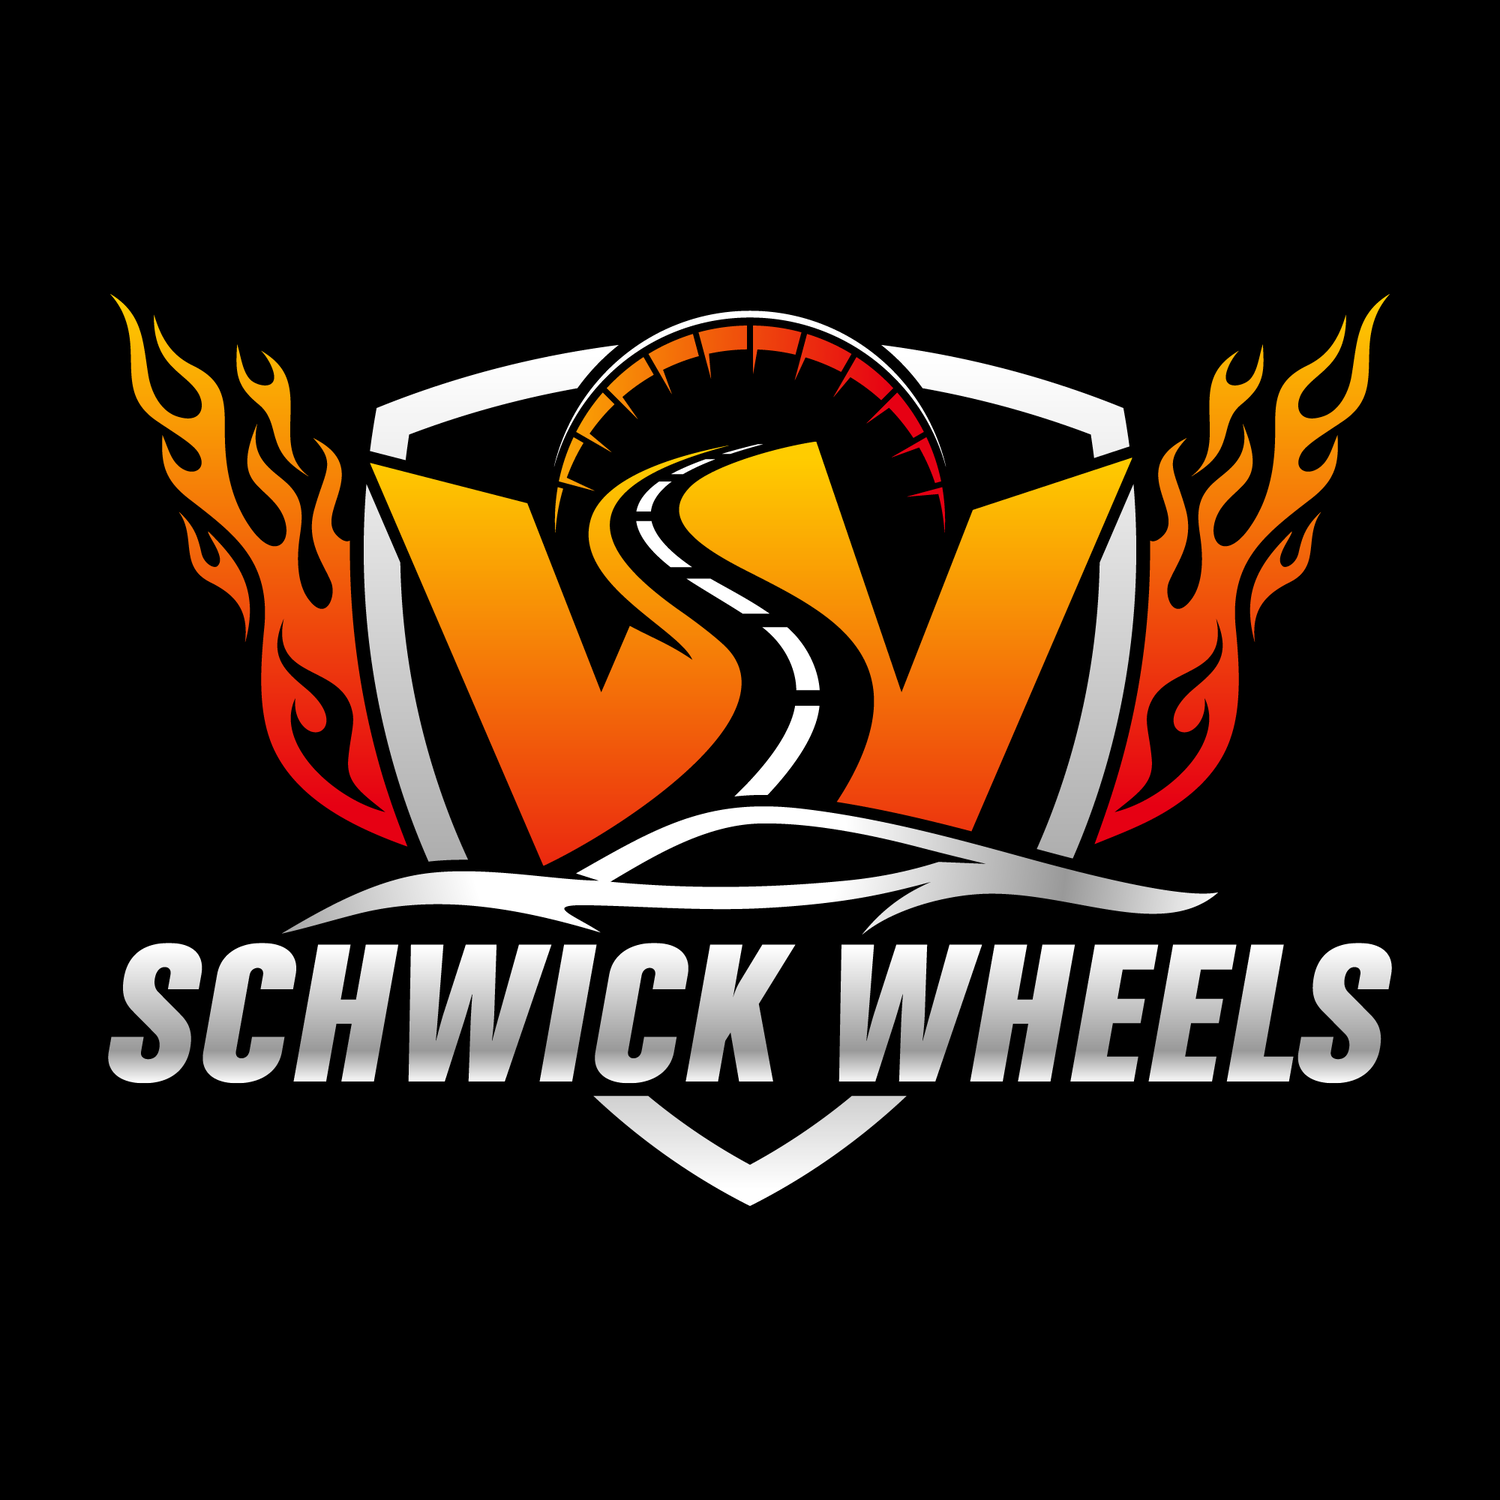 Schwick Wheels Supercar Driving Experience and Reality Entertainment Videos